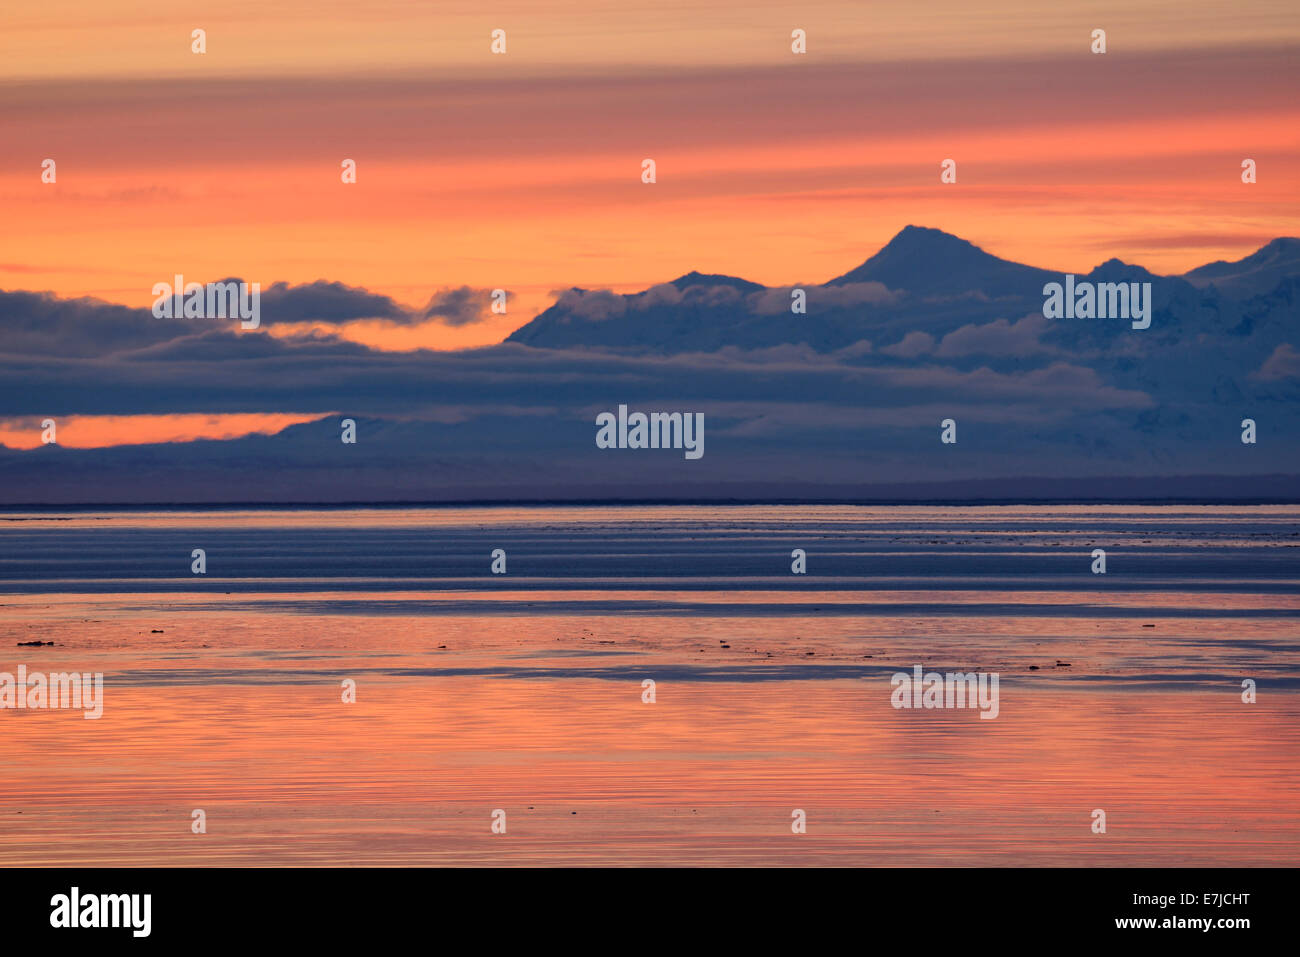 USA, United States, America, Alaska, Far North, Anchorage, cook inlet, water, sunset, red, mountains, landscape Stock Photo